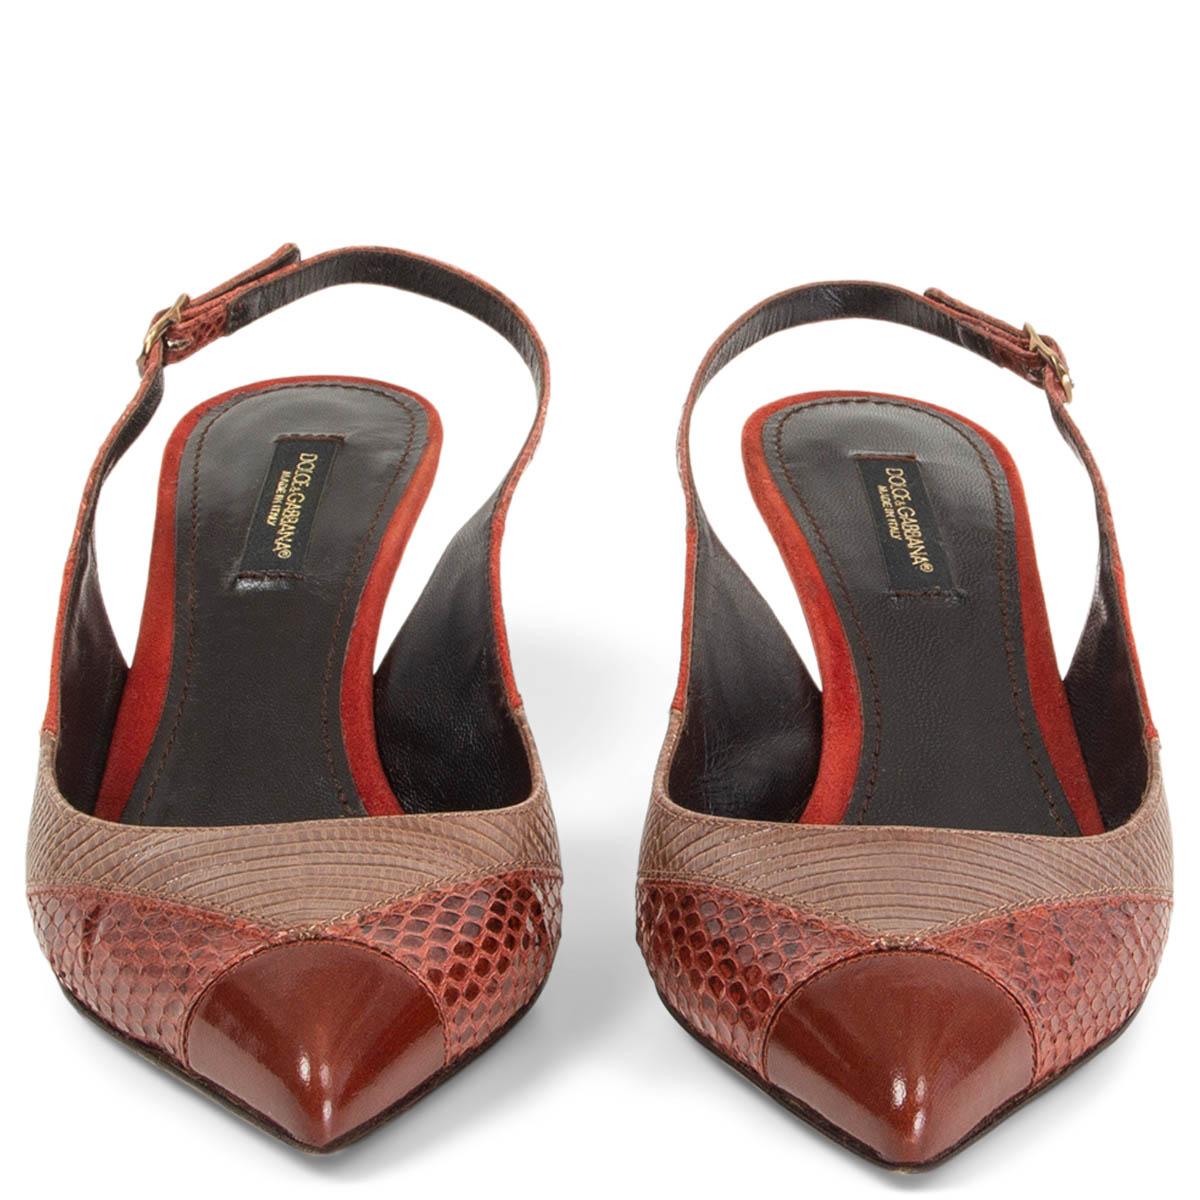 100% authentic Dolce & Gabbana pointed-toe, kitten-heel, patch-work slingbacks in brown, rust and brick colored lizard, snakeskin and calfskin. Have been worn and are in excellent condition. 

Measurements
Imprinted Size	36.5
Shoe Size	36.5
Inside